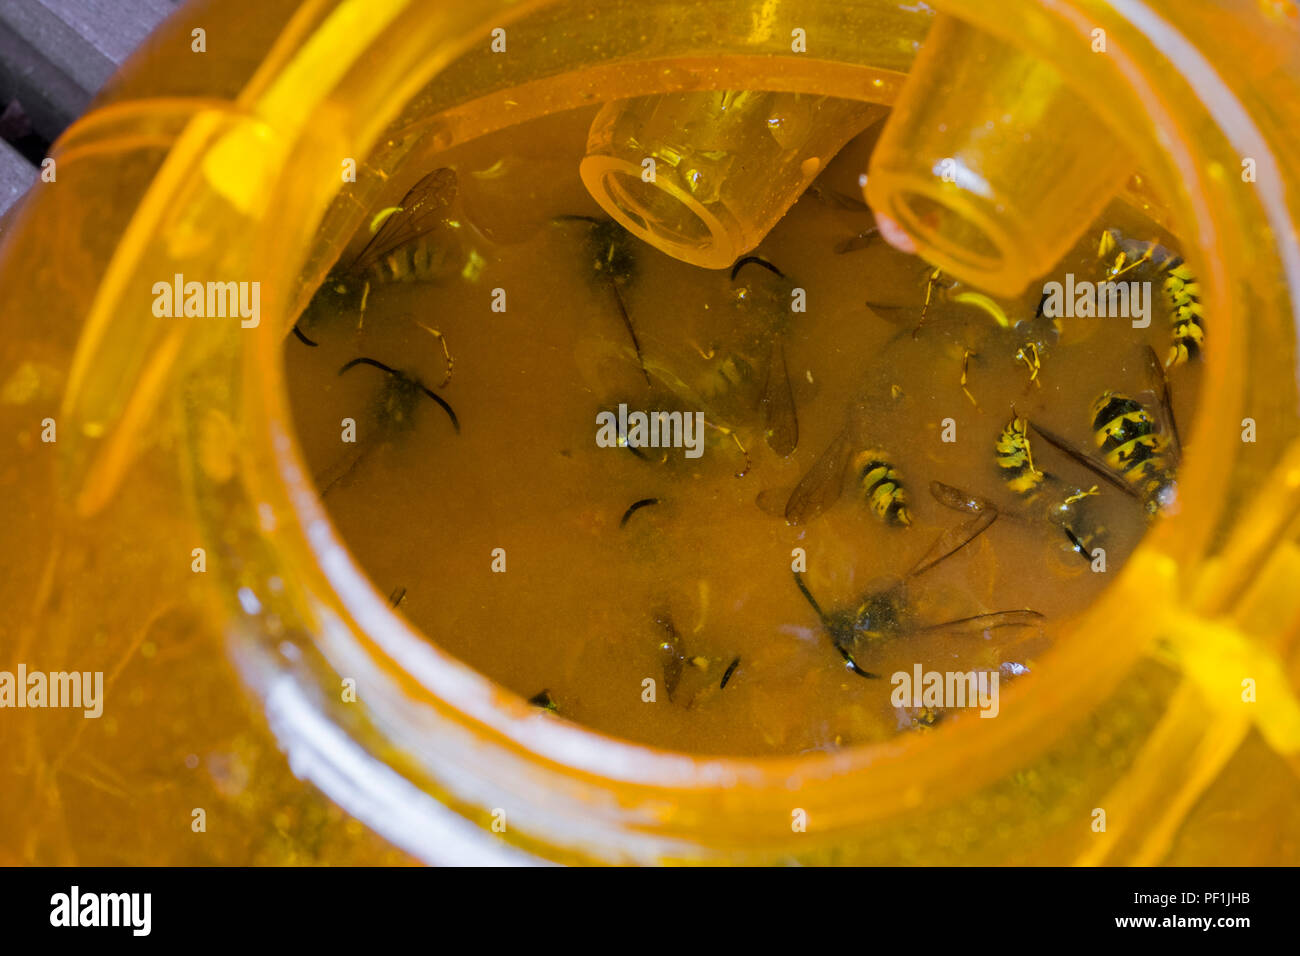 Plastic outdoor wasp trap attracting, trapping and killing wasps by drowning them in sweet liquid like beer or lemonade in summer Stock Photo